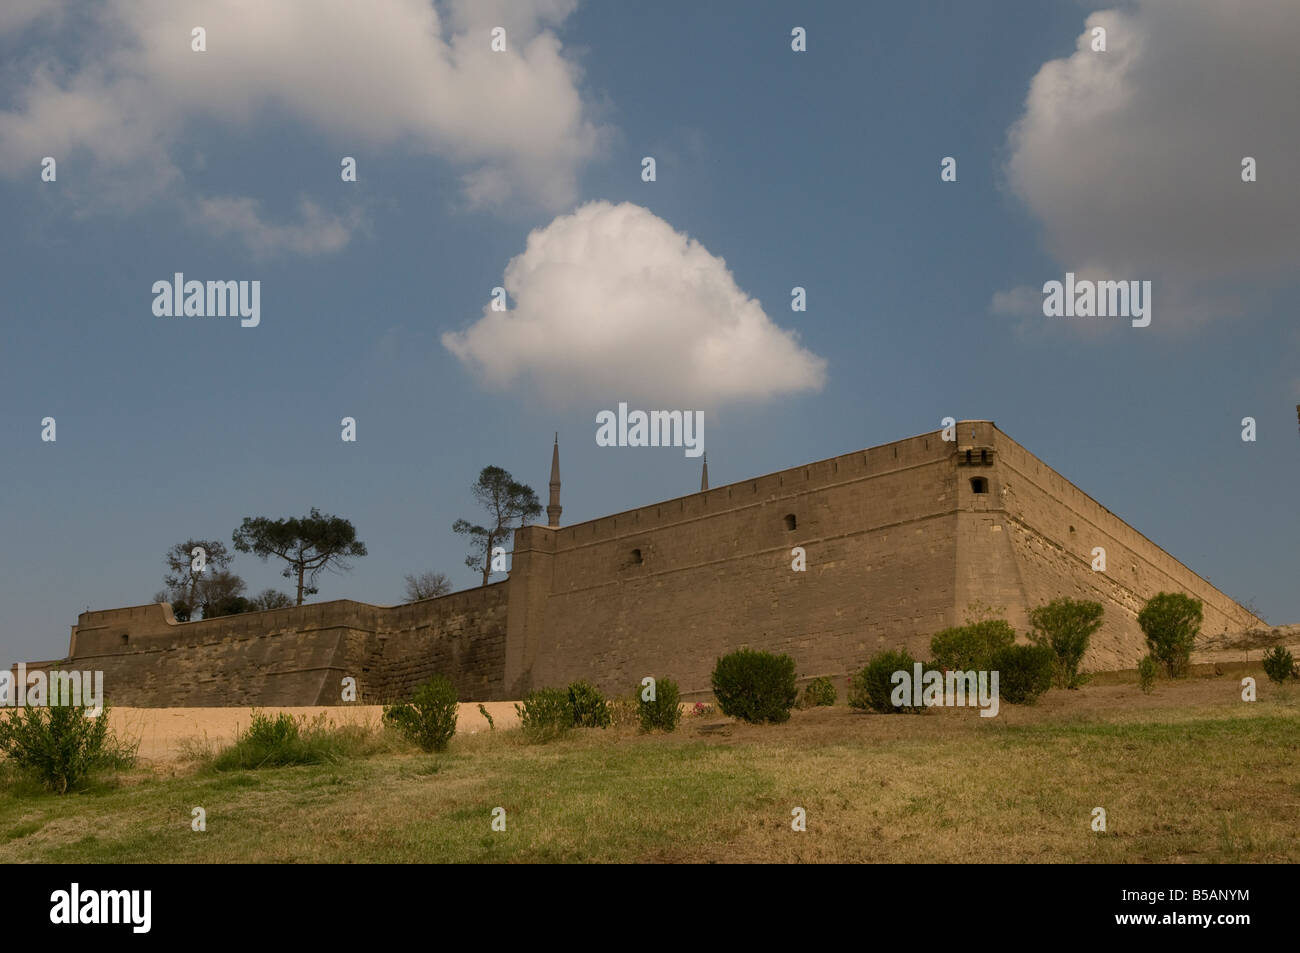 The external walls of Saladin or Salaḥ ad-Dīn Citadel a medieval Islamic fortification located on Mokattam hill in Cairo, Egypt Stock Photo